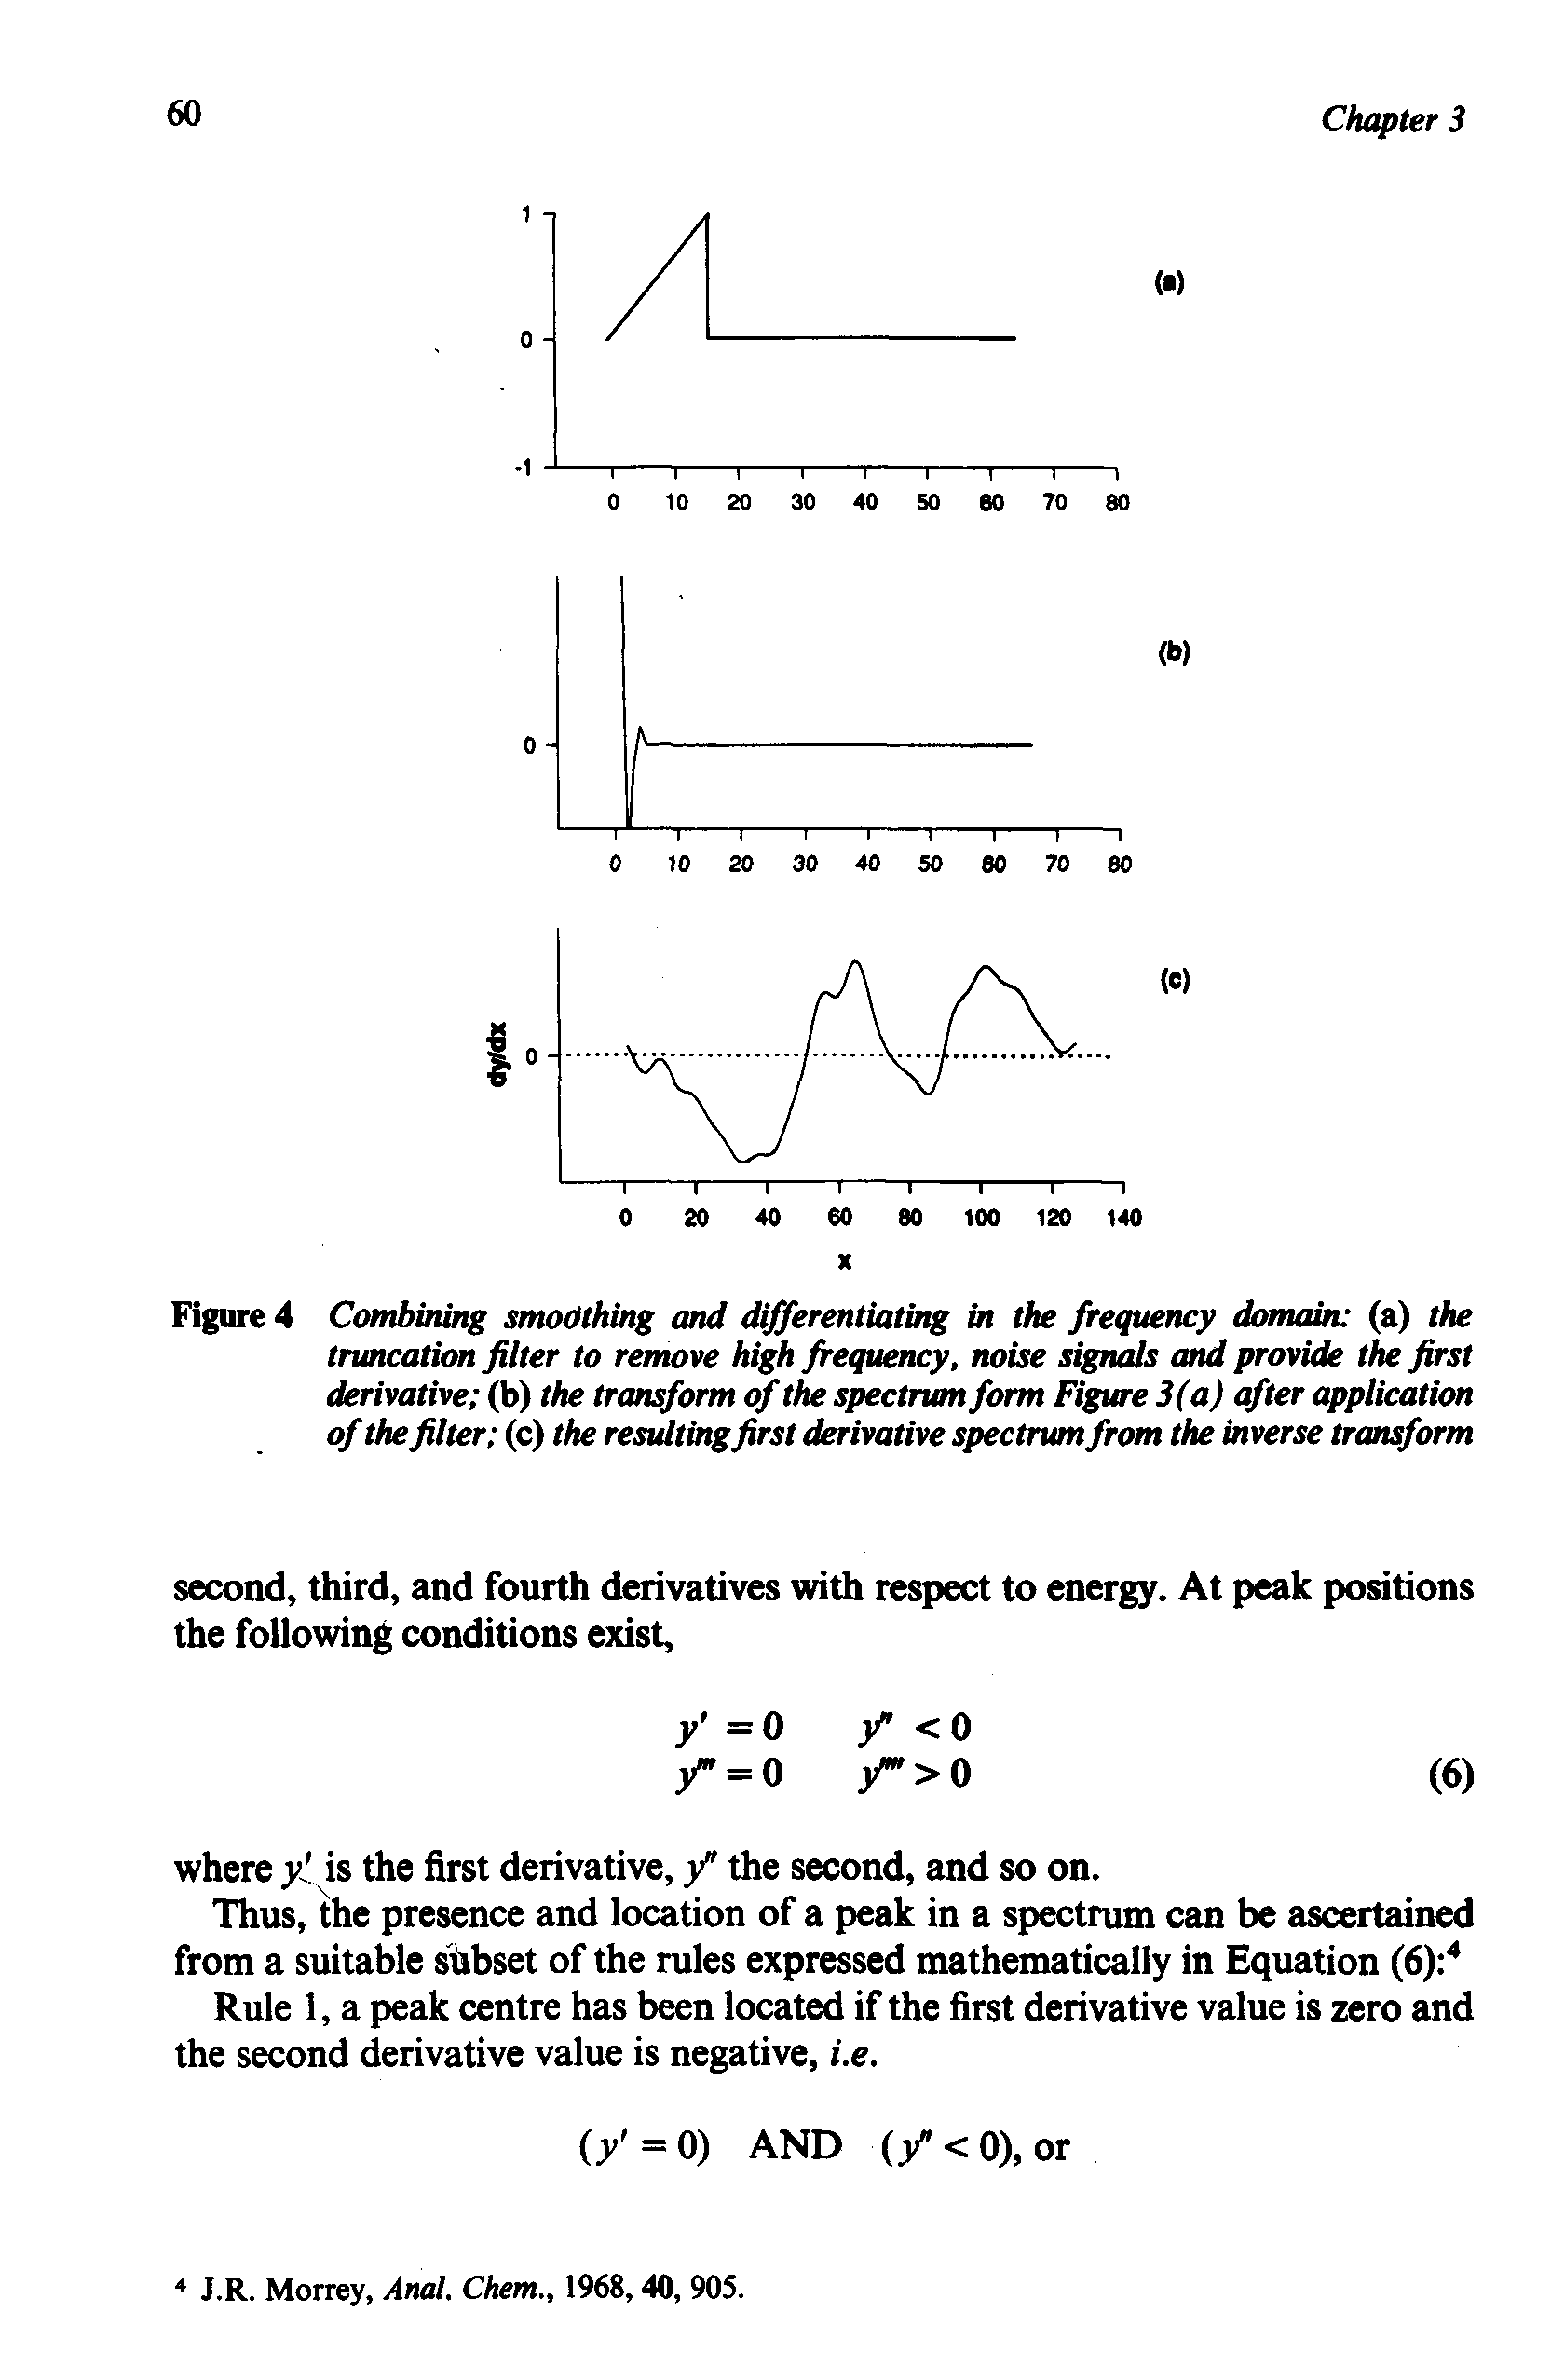 Figure 4 Combining smoothing and differentiating in the frequency domain (a) the truncation filter to remove high frequency, noise sigruds and provide the first derivative (b) the transform of the spectrum form Figure 3(a) after application of the filter (c) the resultingfirst derivative spectrum from the inverse transform...